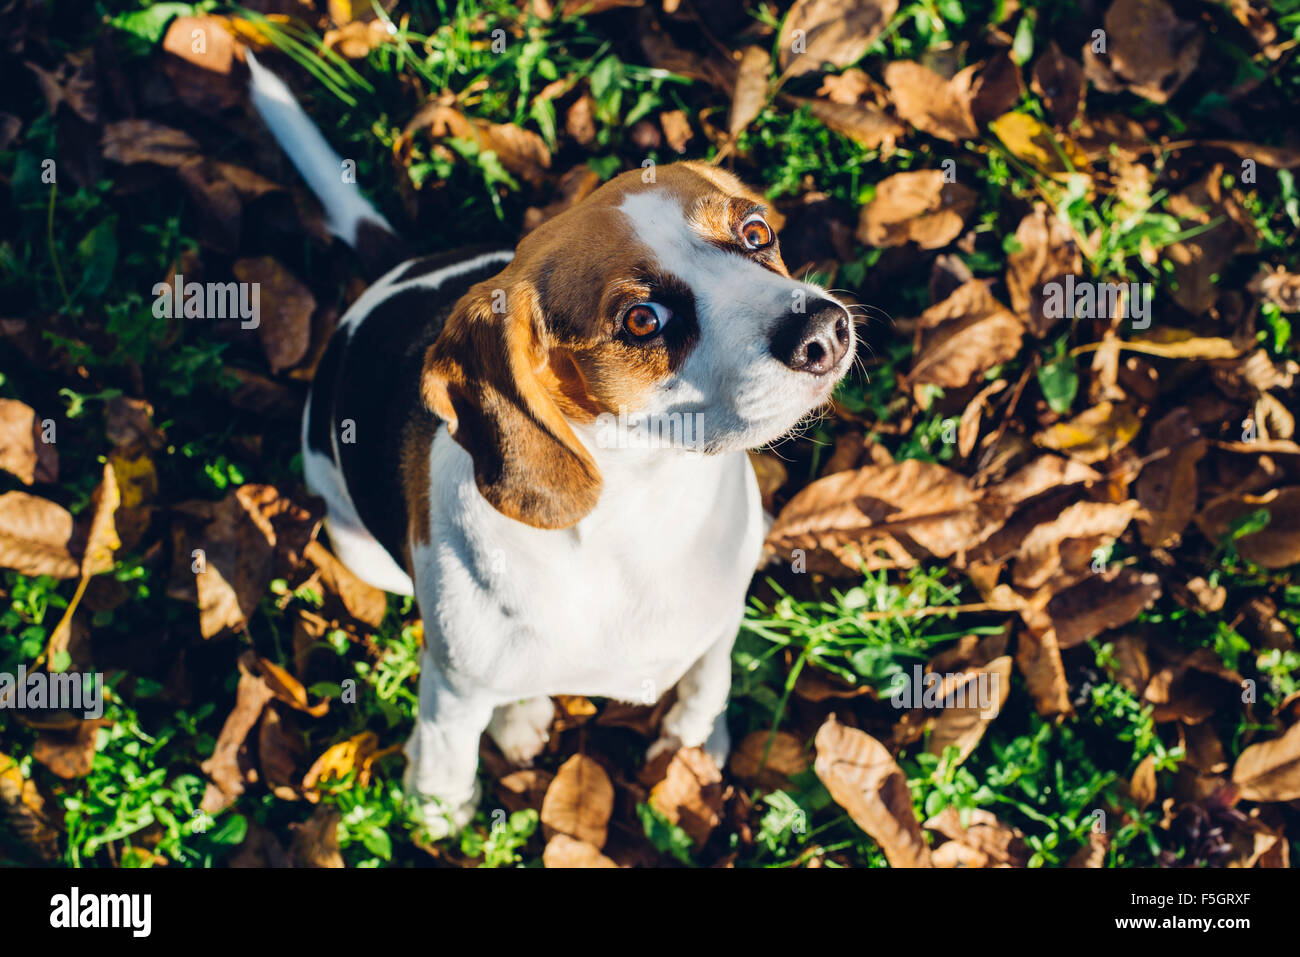 Tricolor beagle dog sitting on yellow fallen leaves and looking askance into camera Stock Photo